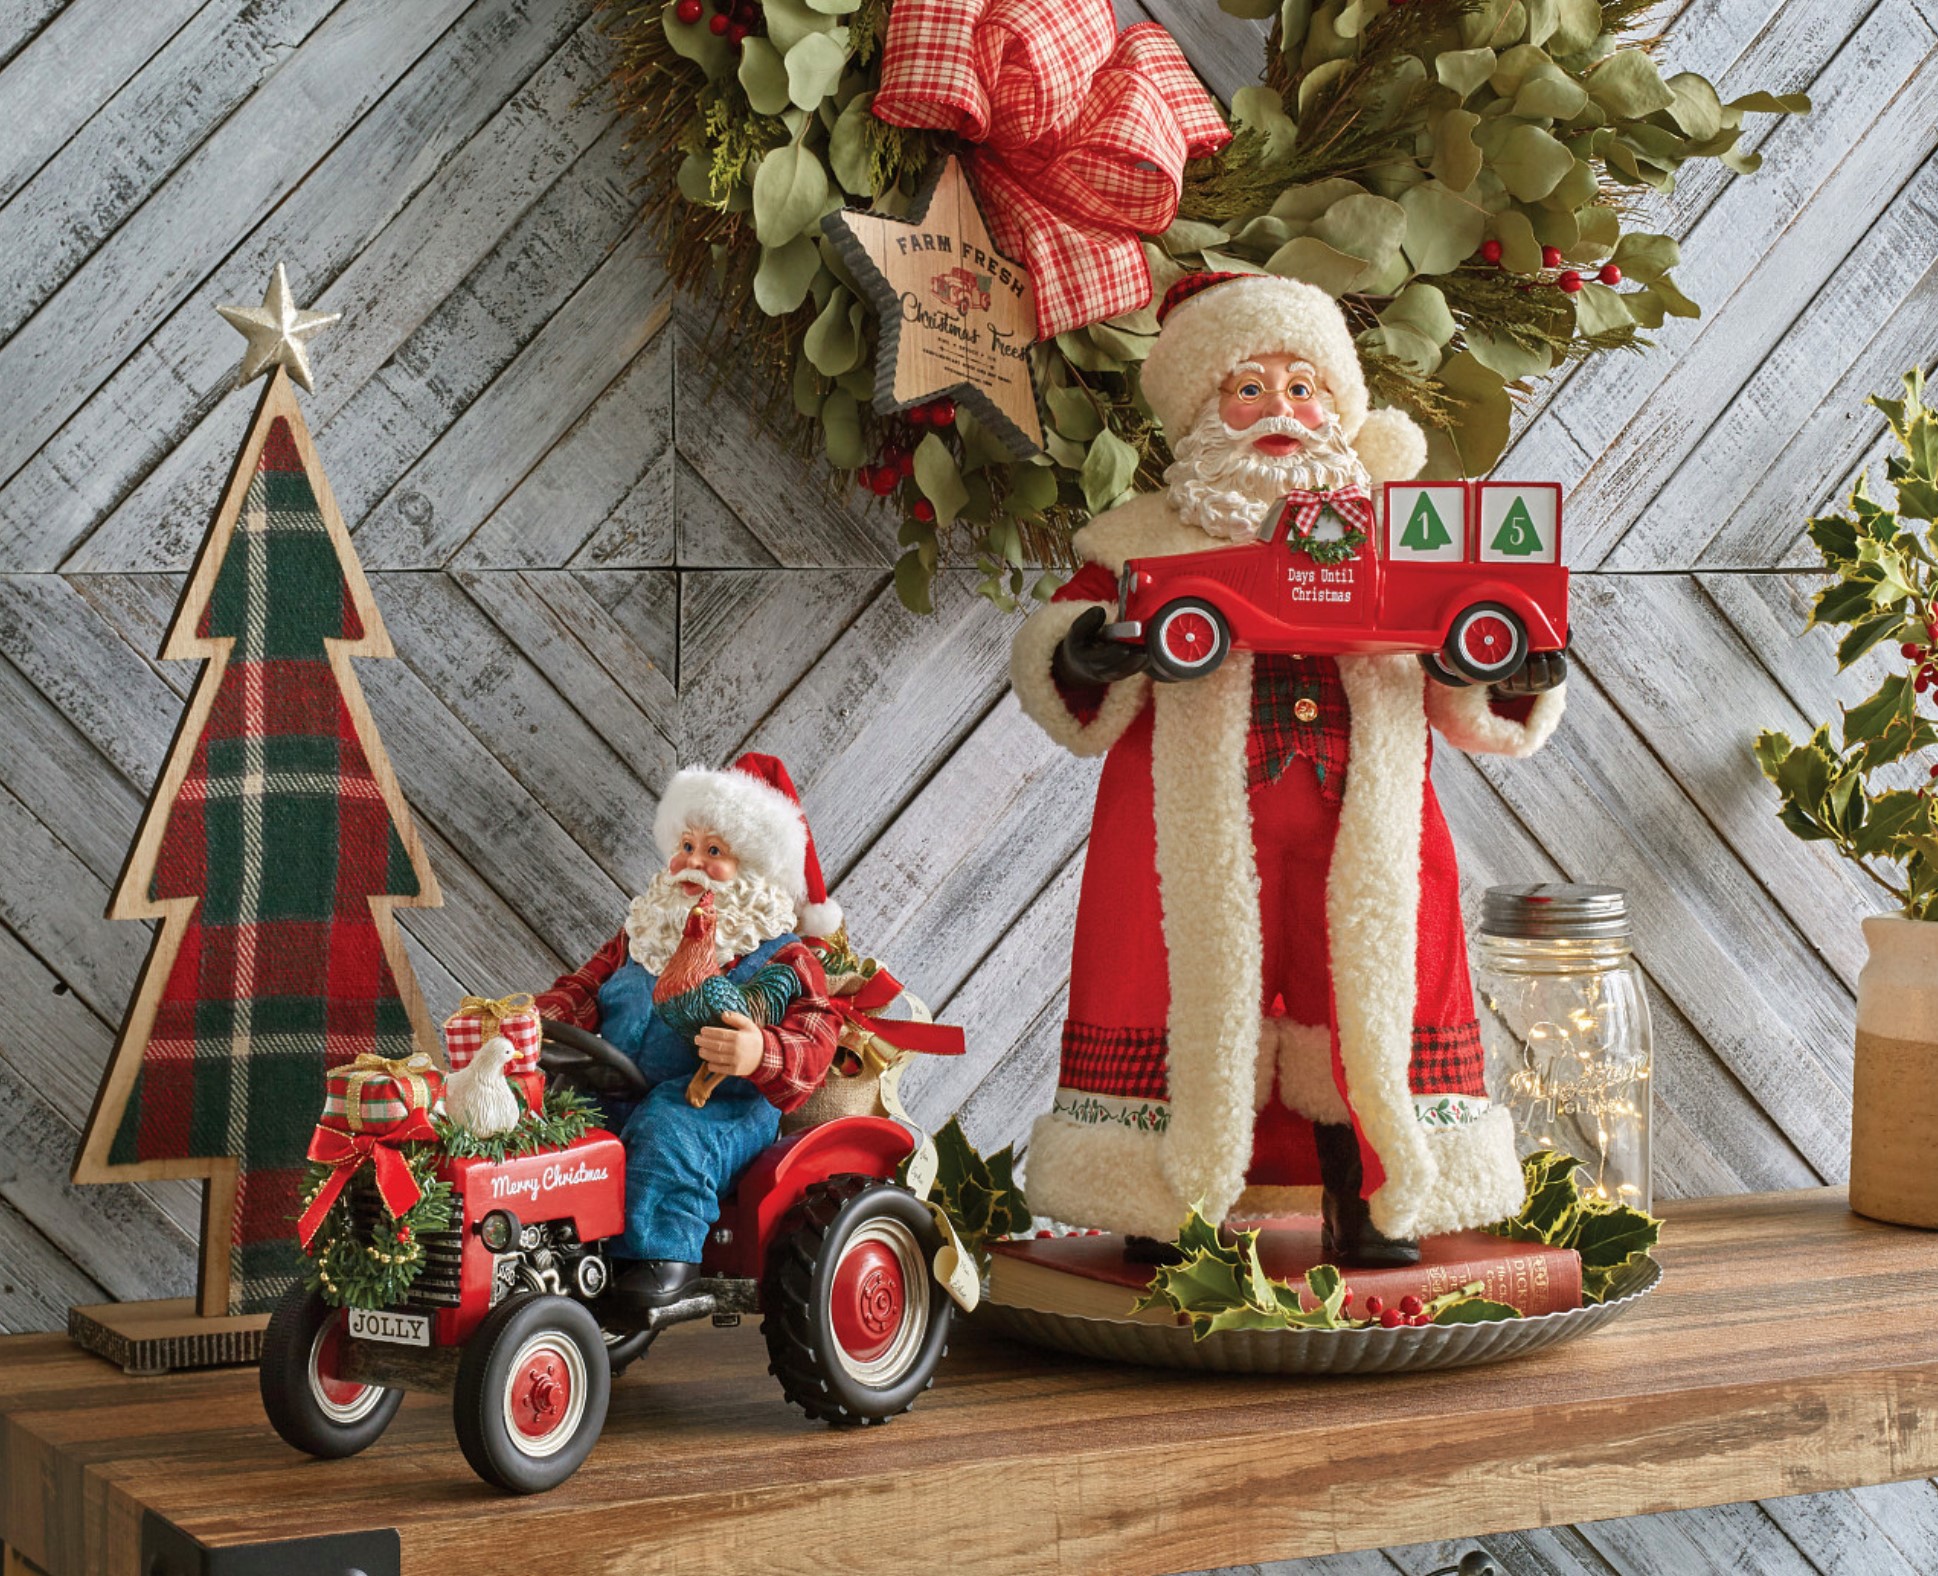 Stylized photo of Department 56 Possible Dreams Santa Figurines. One is riding a tractor and the other is a countdown to Christmas